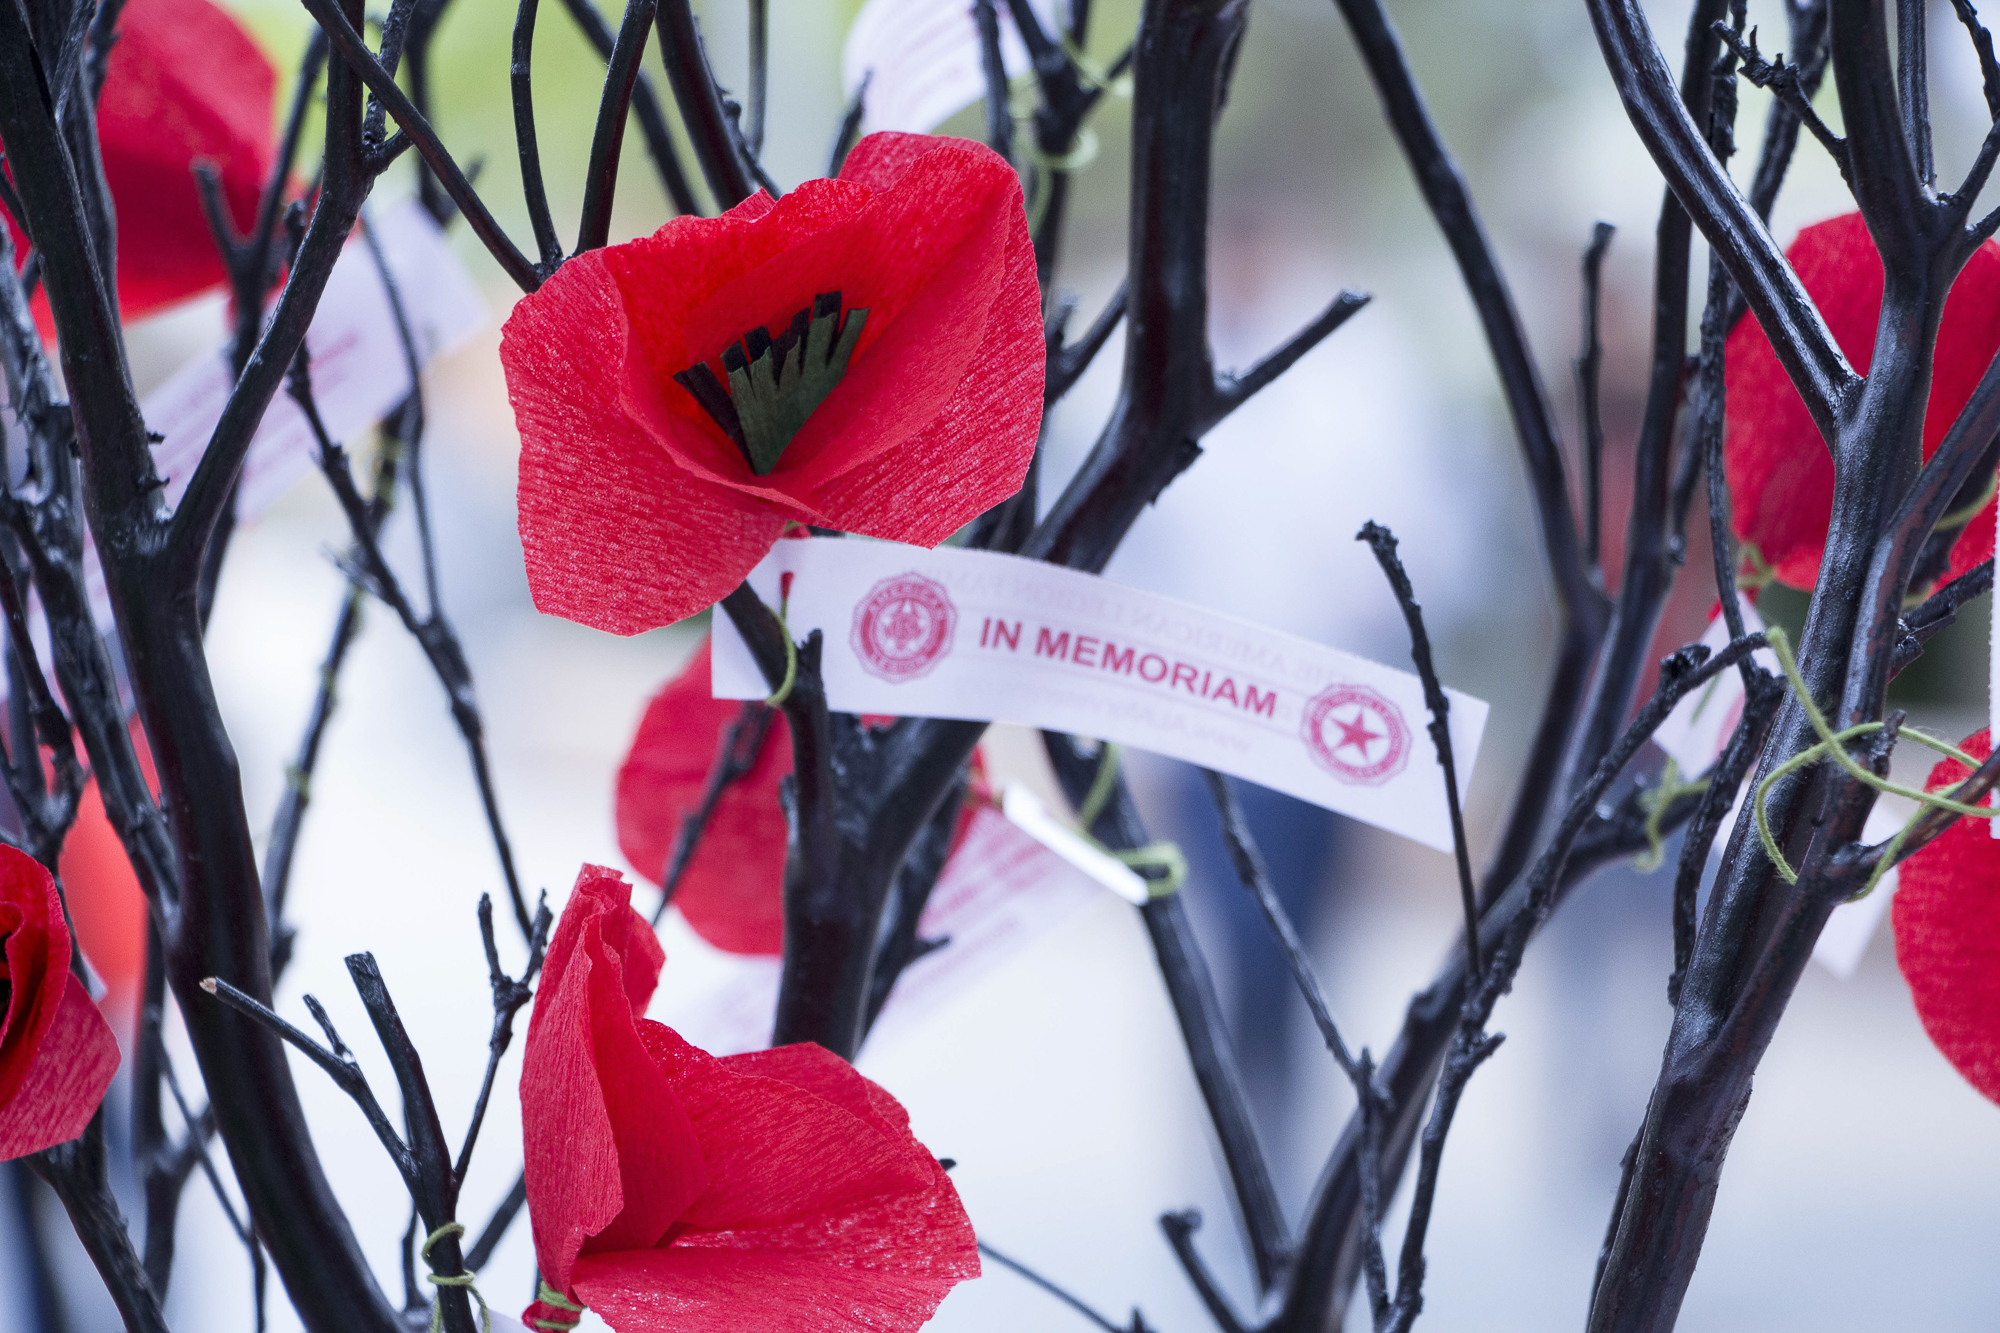  Handmade red poppies, the official symbol of rememberance inspired by John Macrea's poem "In Flanders' Fields" at Santa Monica College's Memorial Day Commemoration in Santa Monica, California on Thursaday May 24, 2018 (Wilson Gomez/Corsair Photo) 